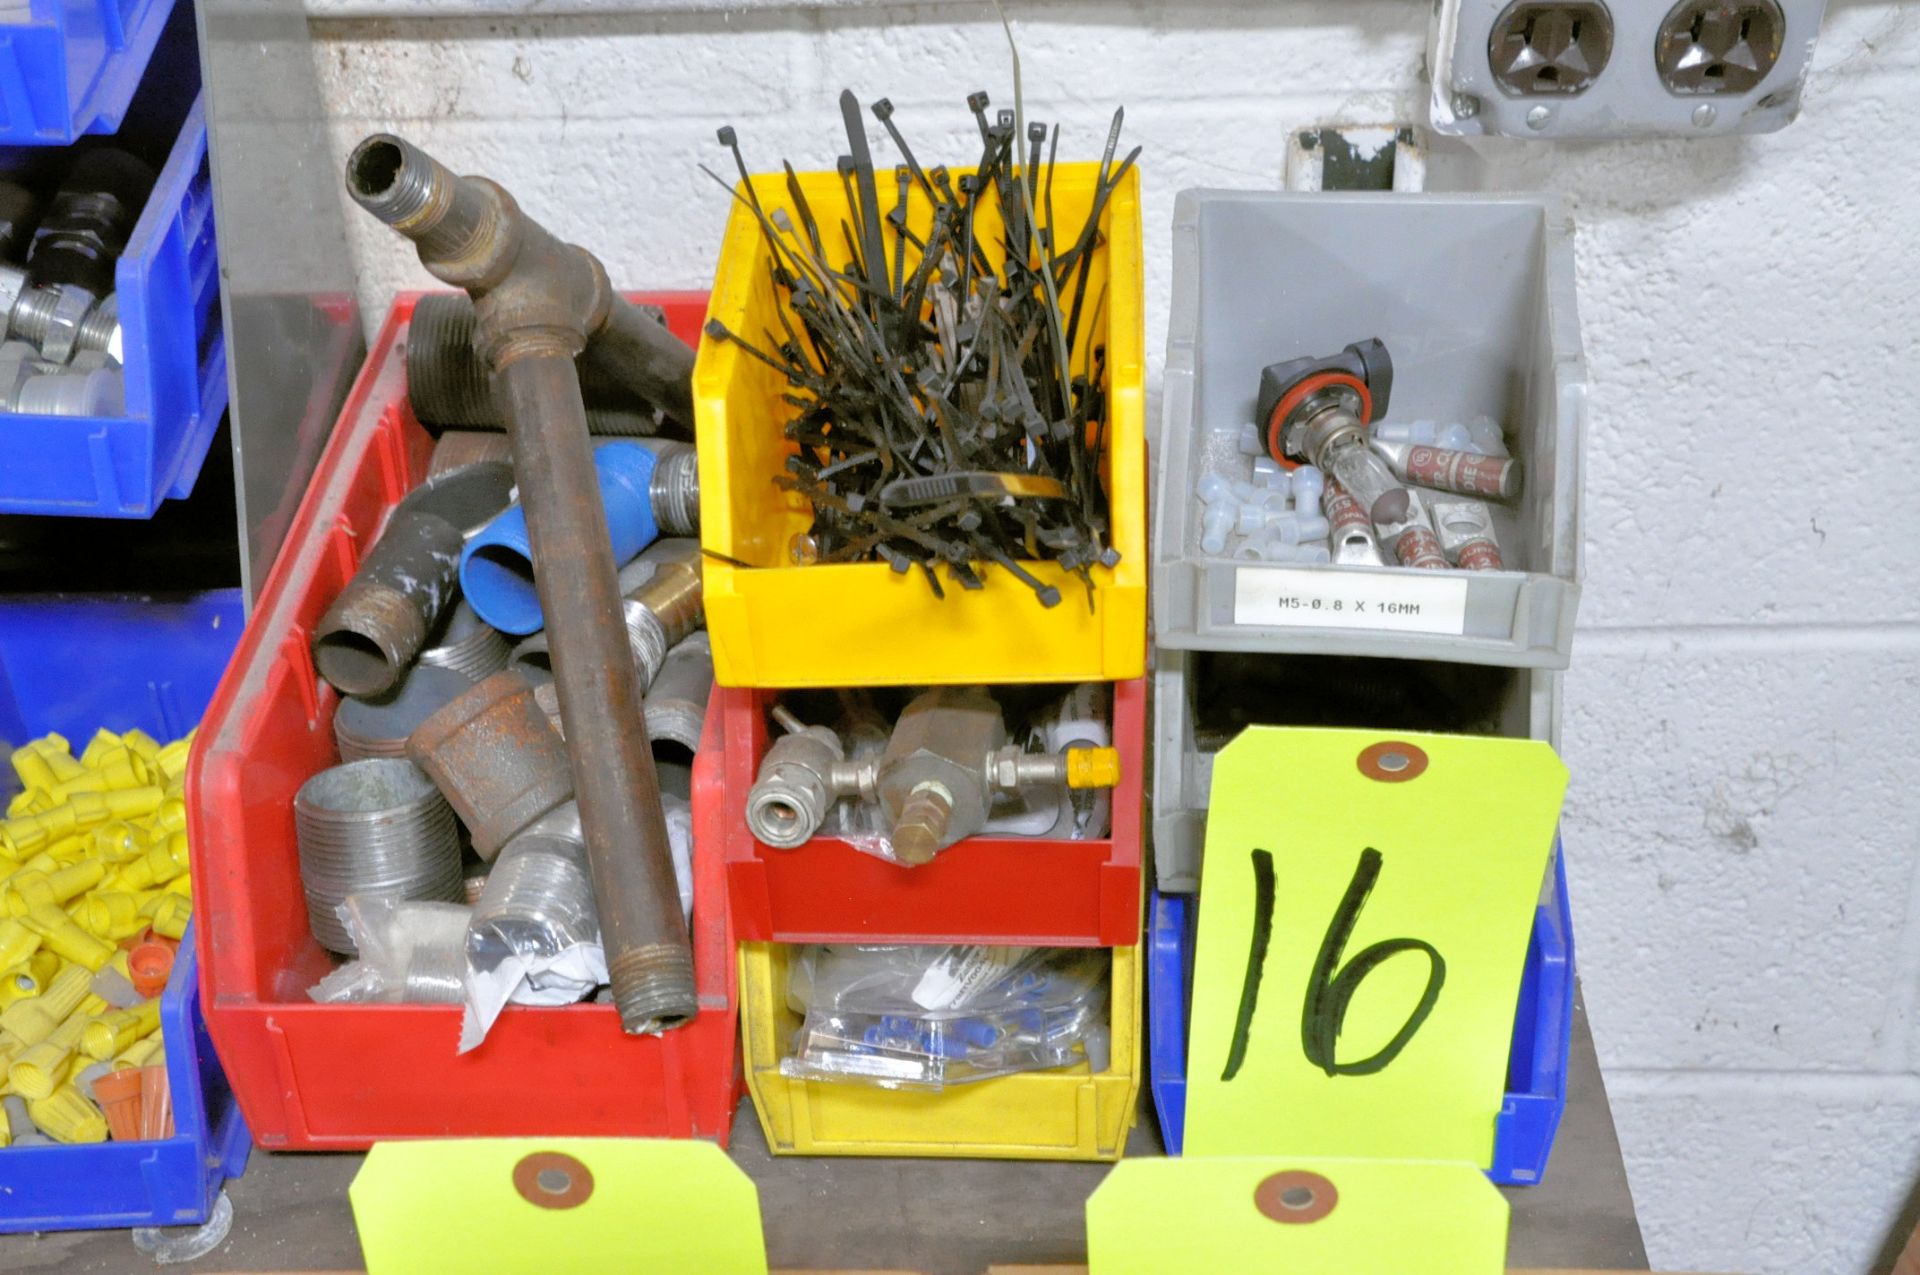 Lot-Brass and Galvanized Fittings etc. with (2) Hanging Bin Racks and Bins - Image 2 of 4